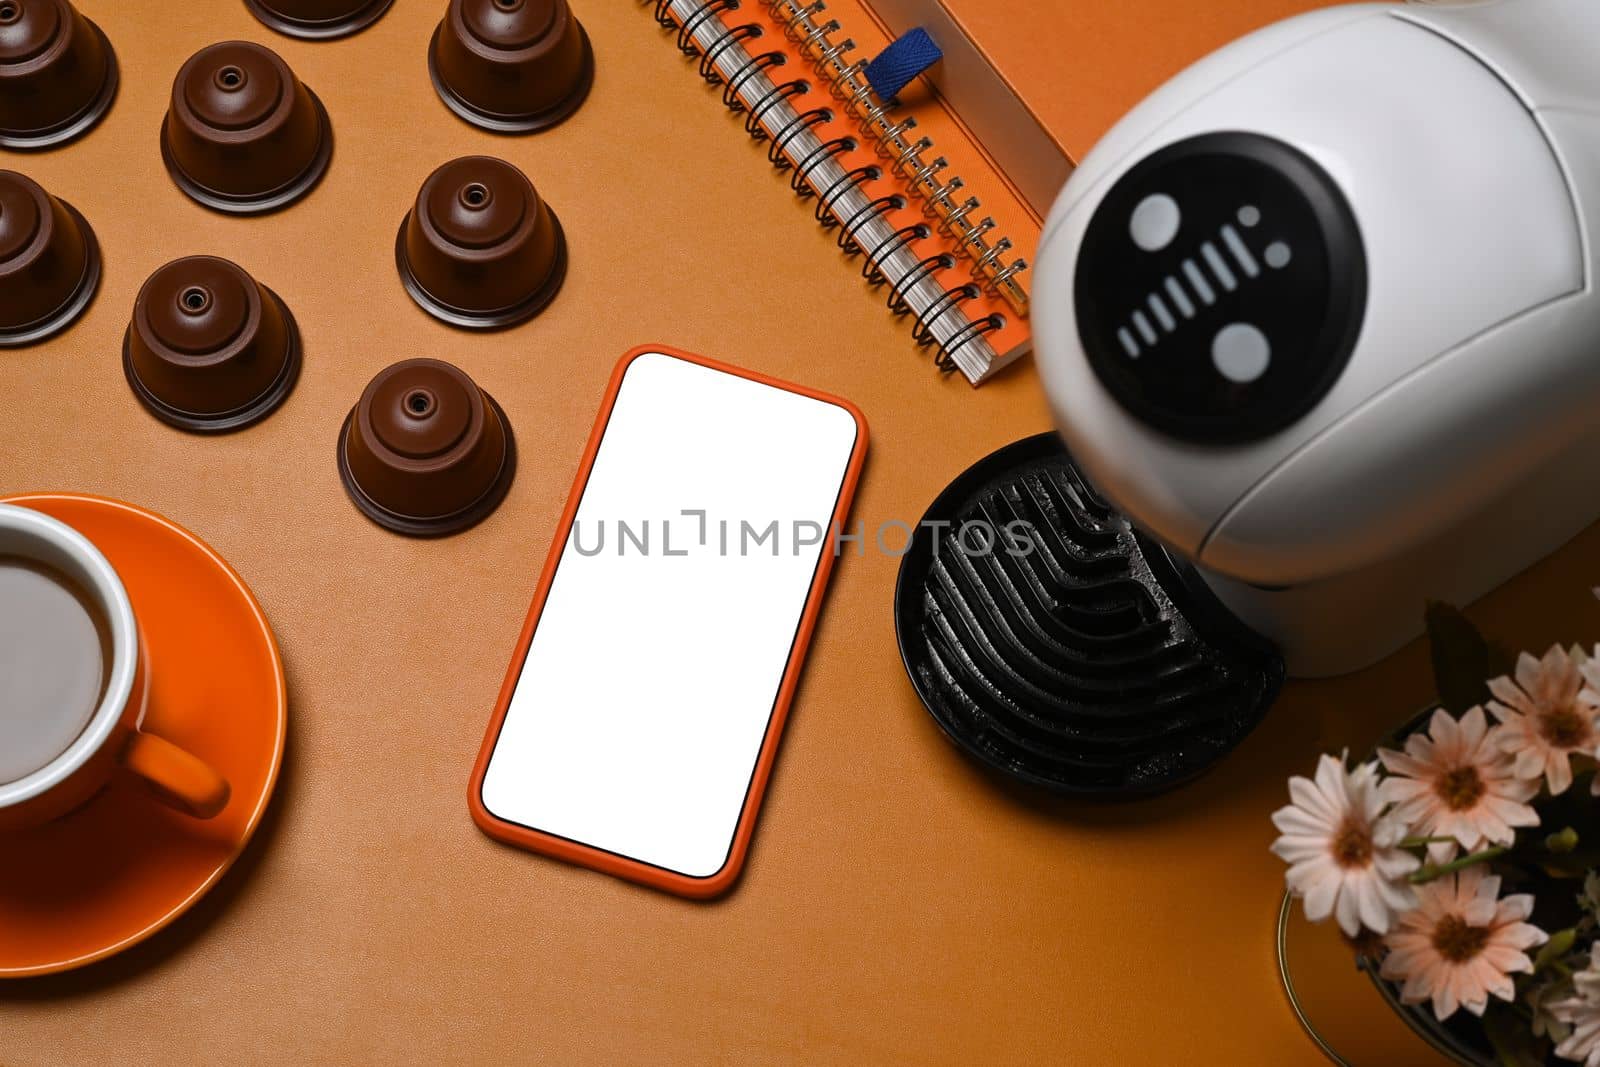 Mock up smart phone, coffee maker and capsules on brown leather. by prathanchorruangsak